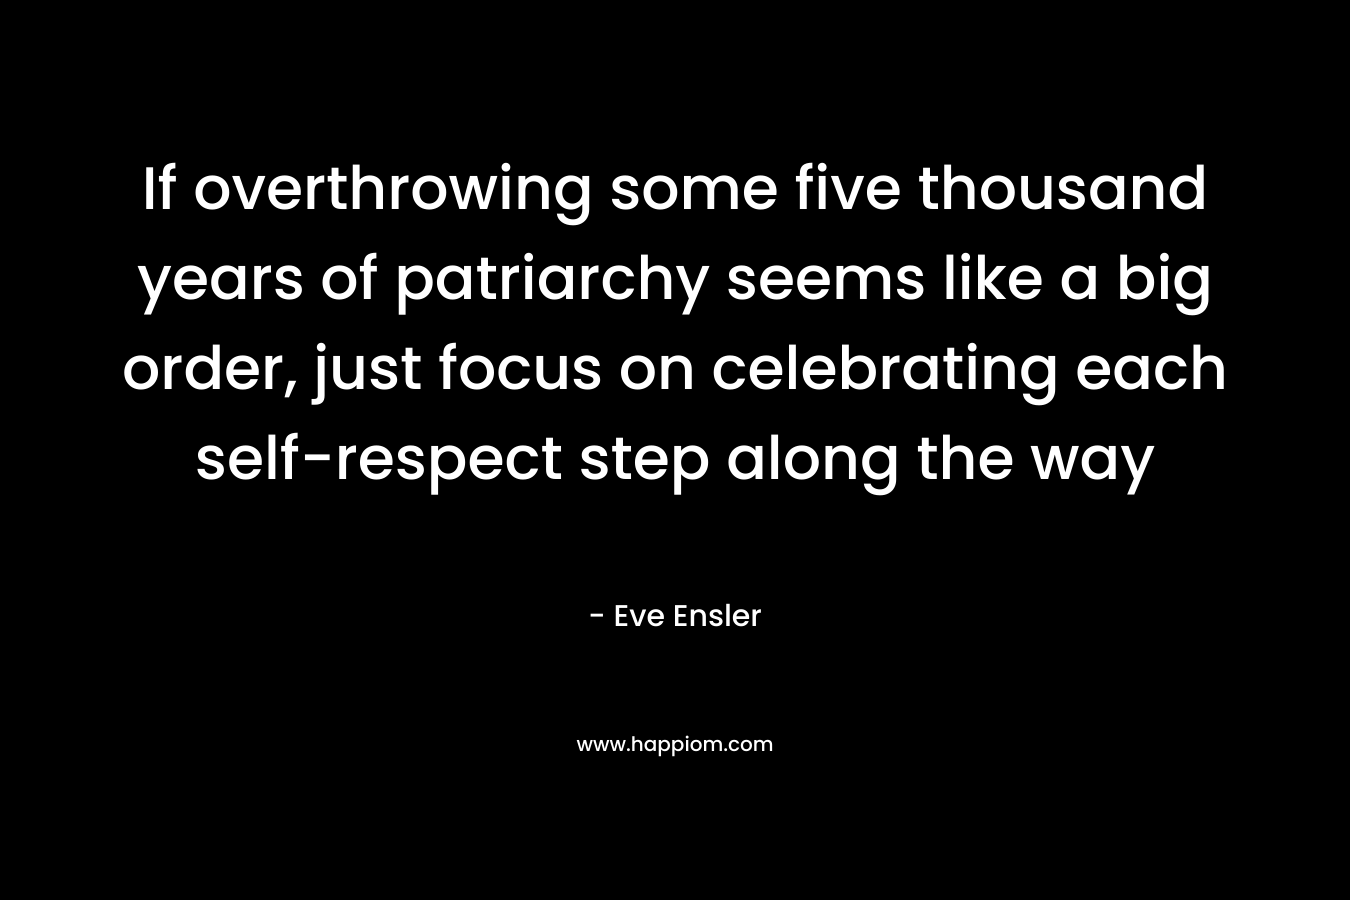 If overthrowing some five thousand years of patriarchy seems like a big order, just focus on celebrating each self-respect step along the way – Eve Ensler